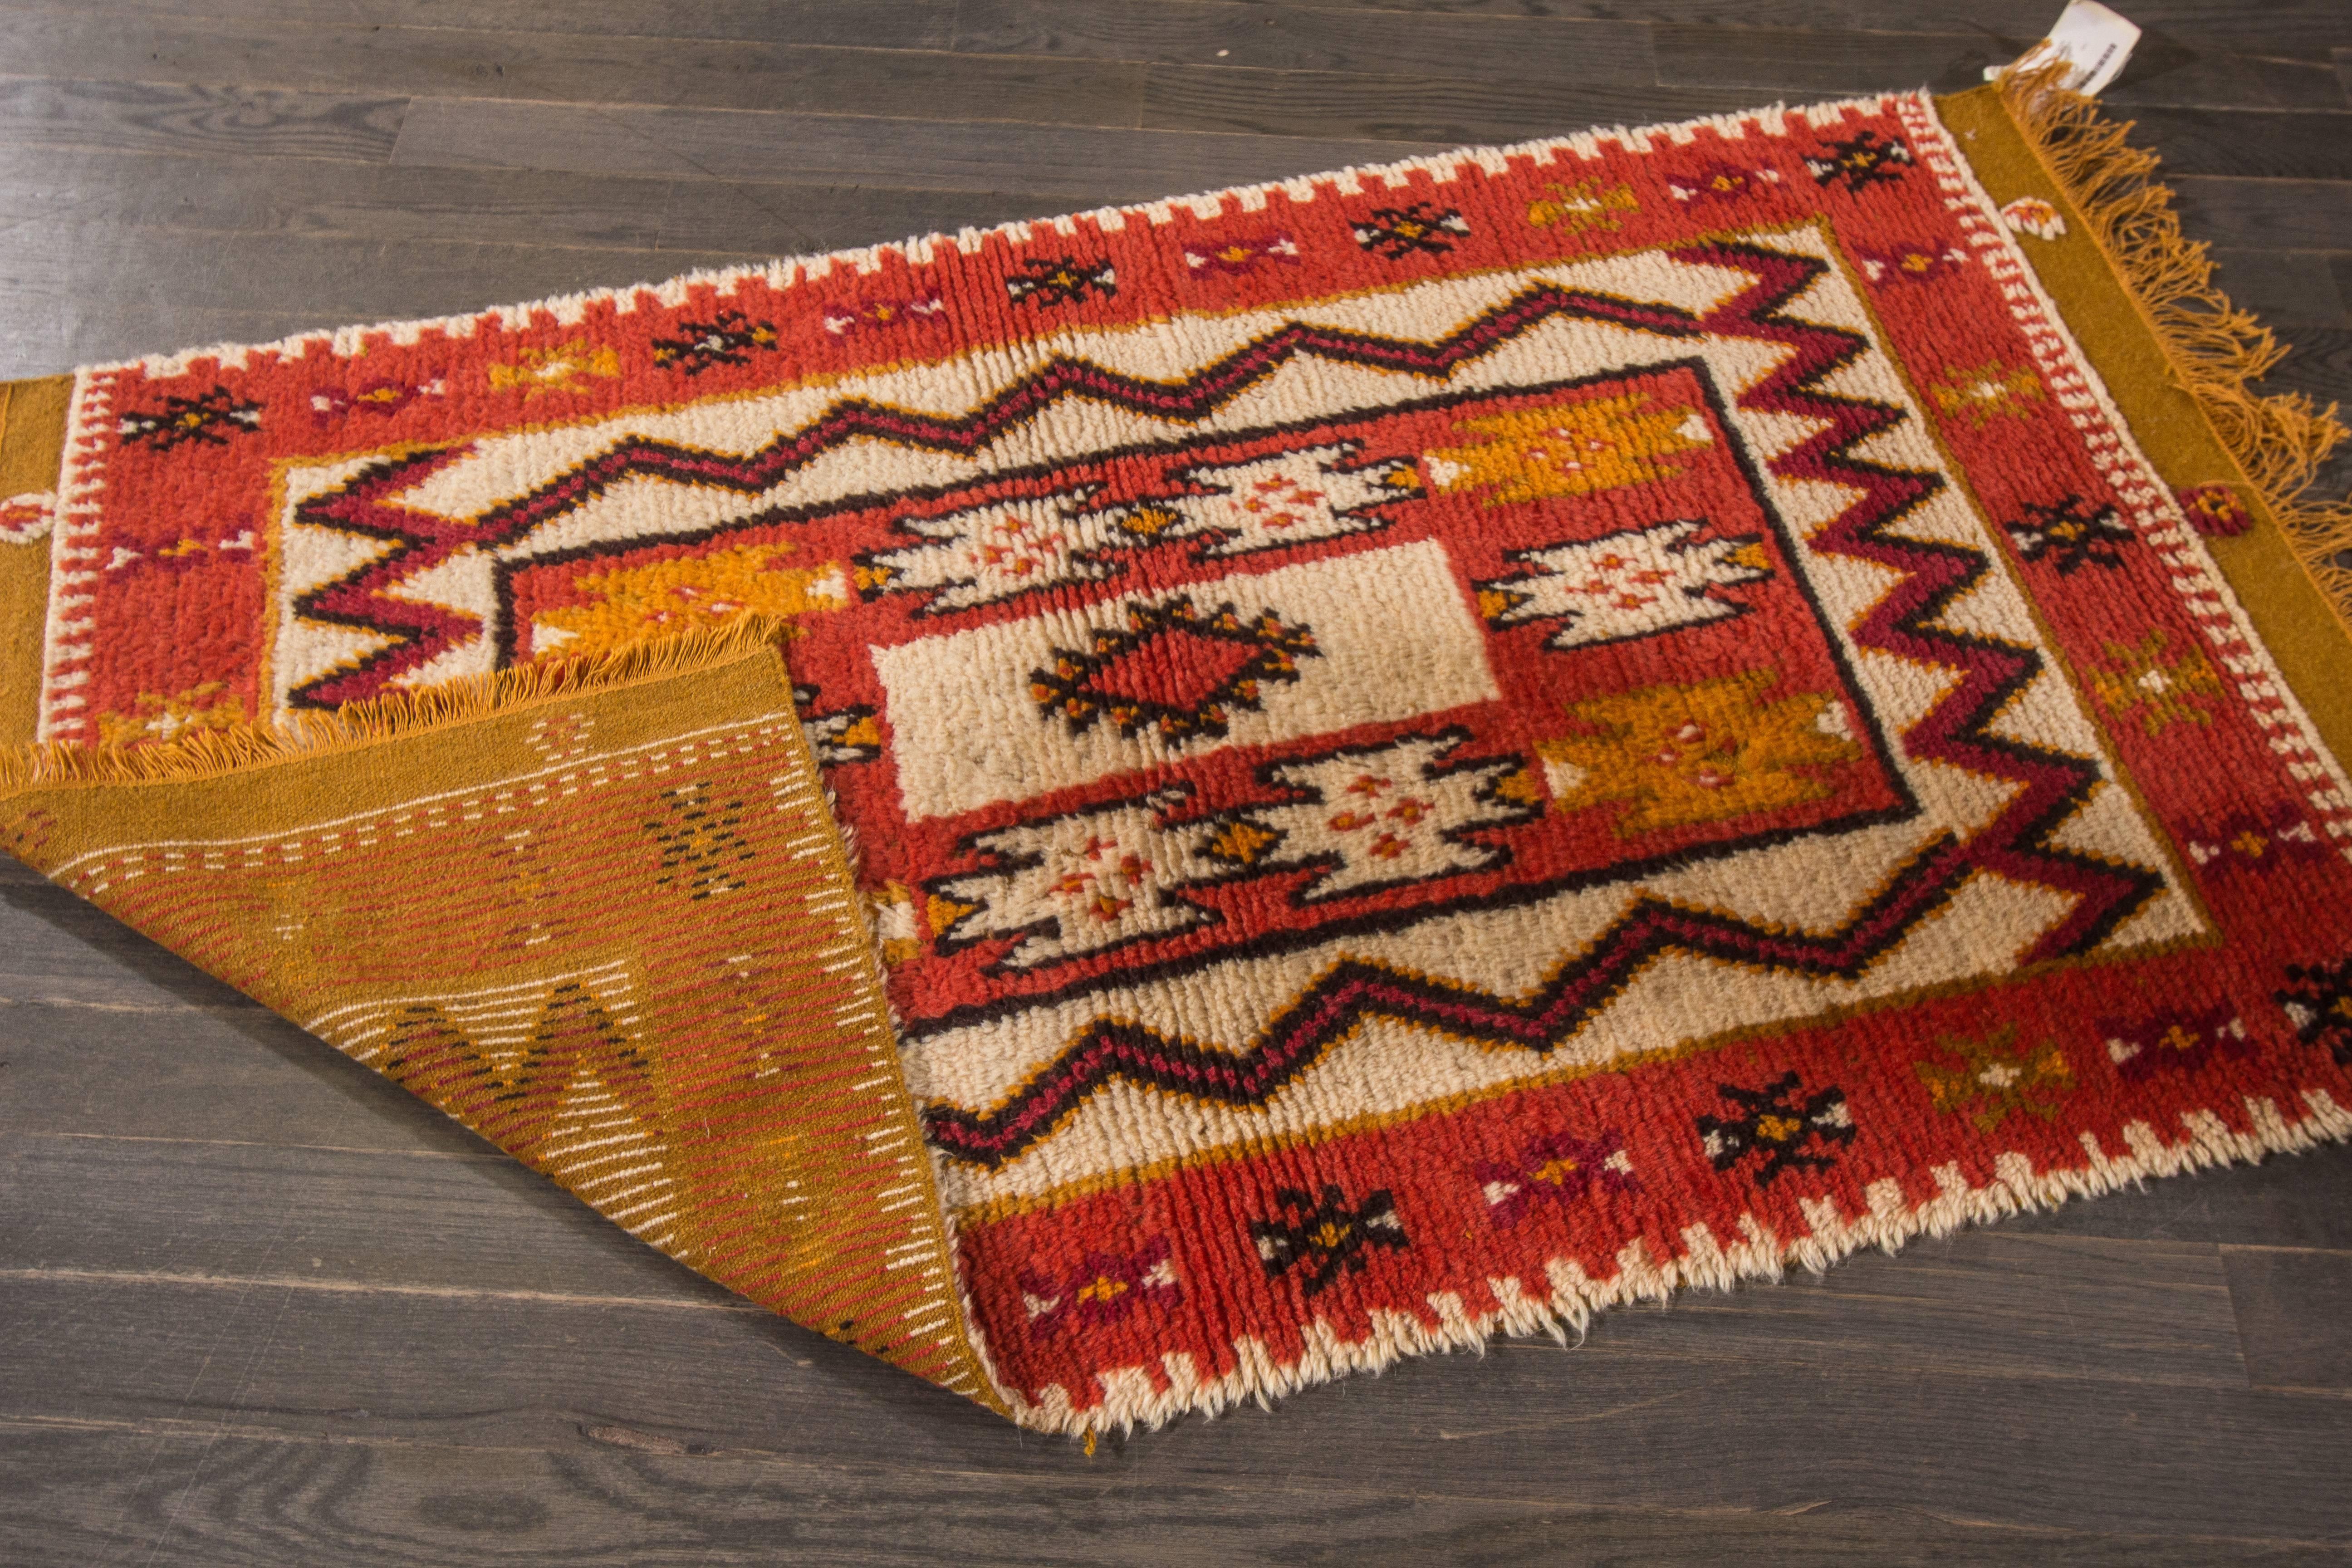 Measures: 3'.1 x 5'
This beautiful hand-knotted design rug will make your floor look splendid. This collection is made in wool.